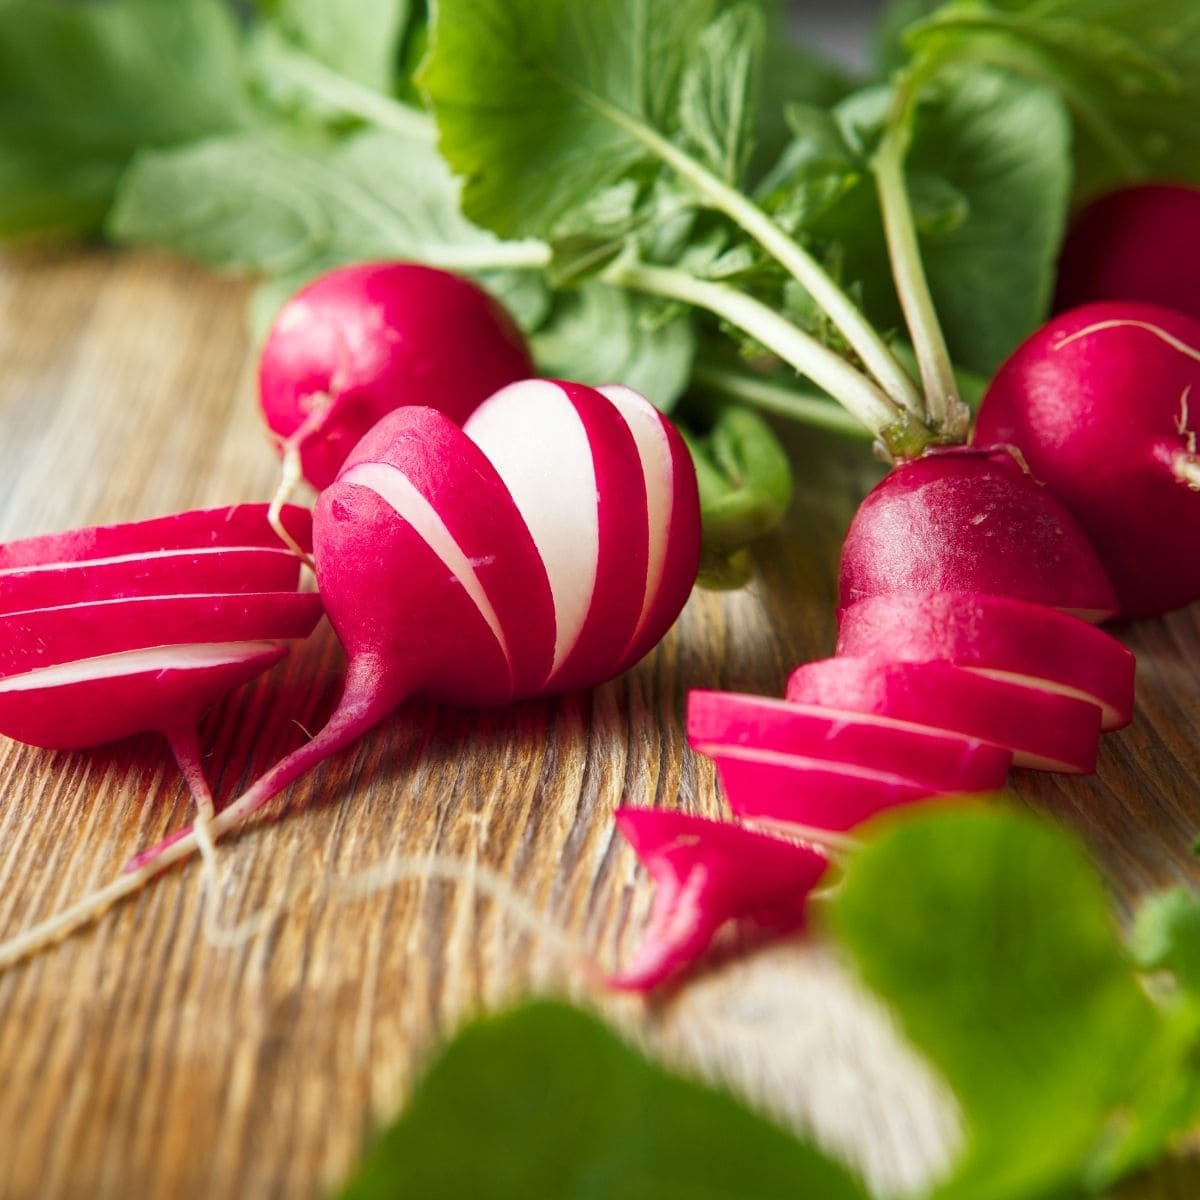 Sliced radishes on a wooden cutting board.